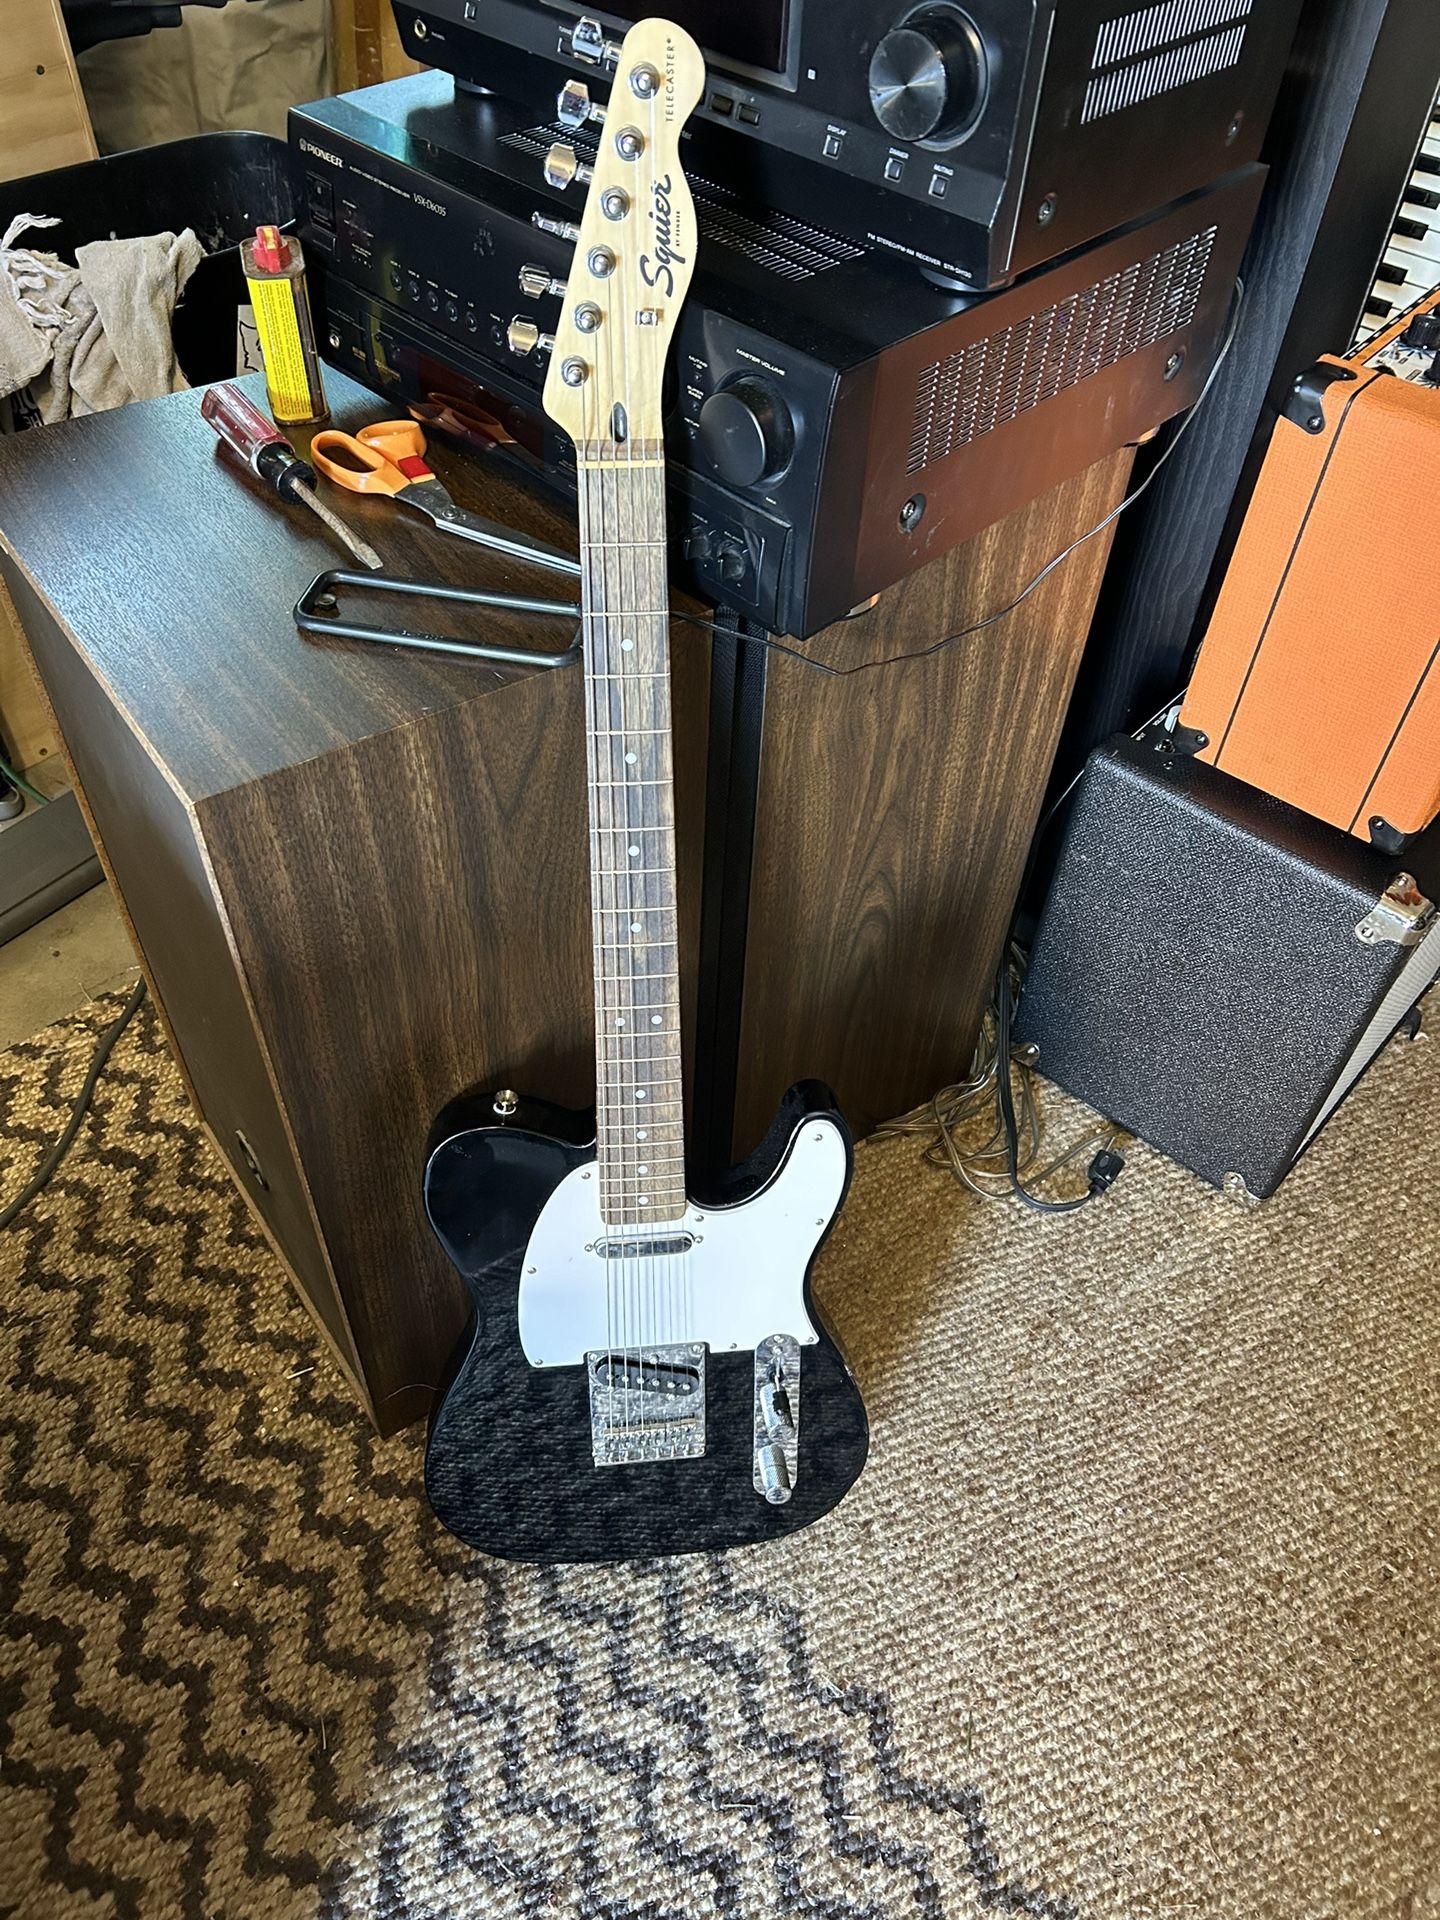 Fender Telecaster Package - includes soft case, guitar stand strap, cord, and practice amp